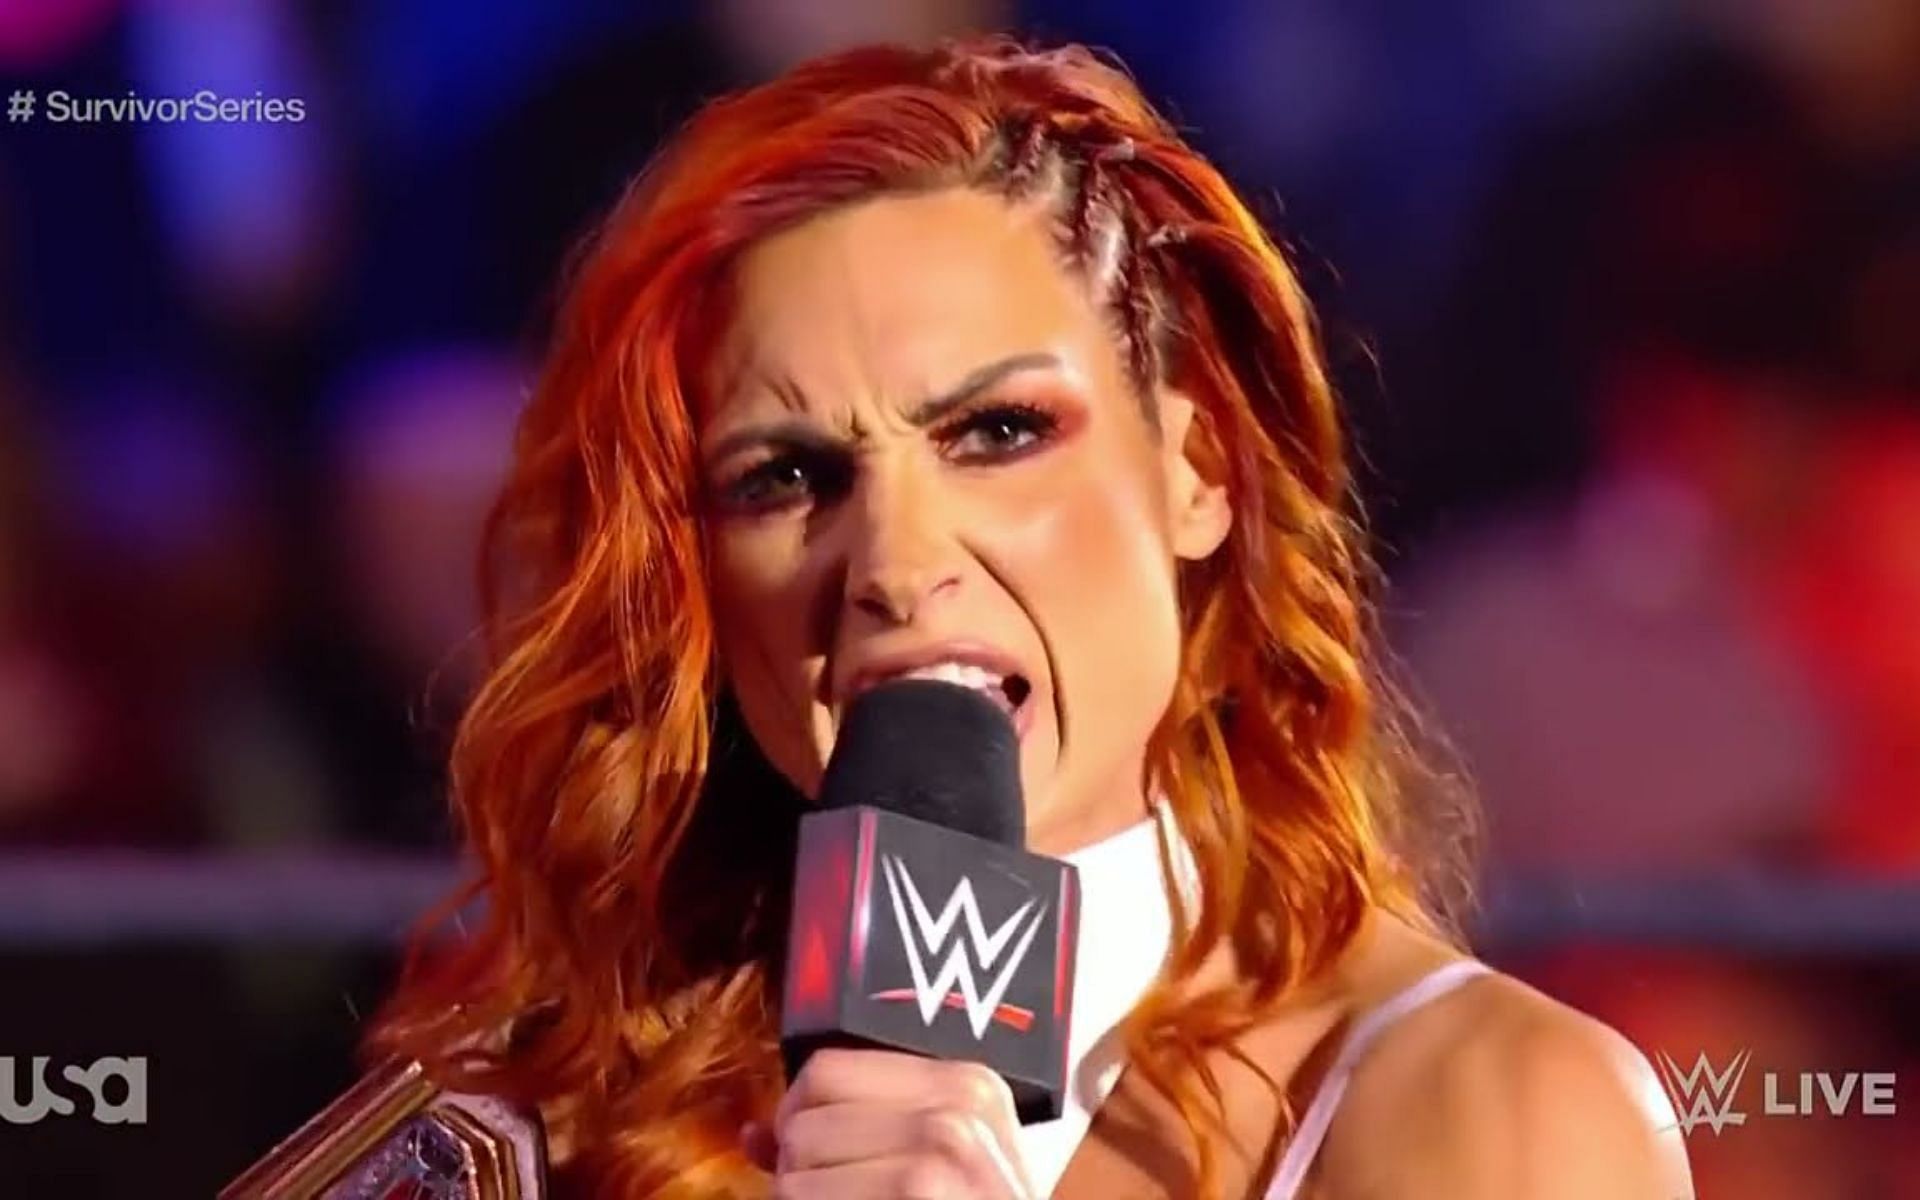 Becky Lynch is a multi-time champion